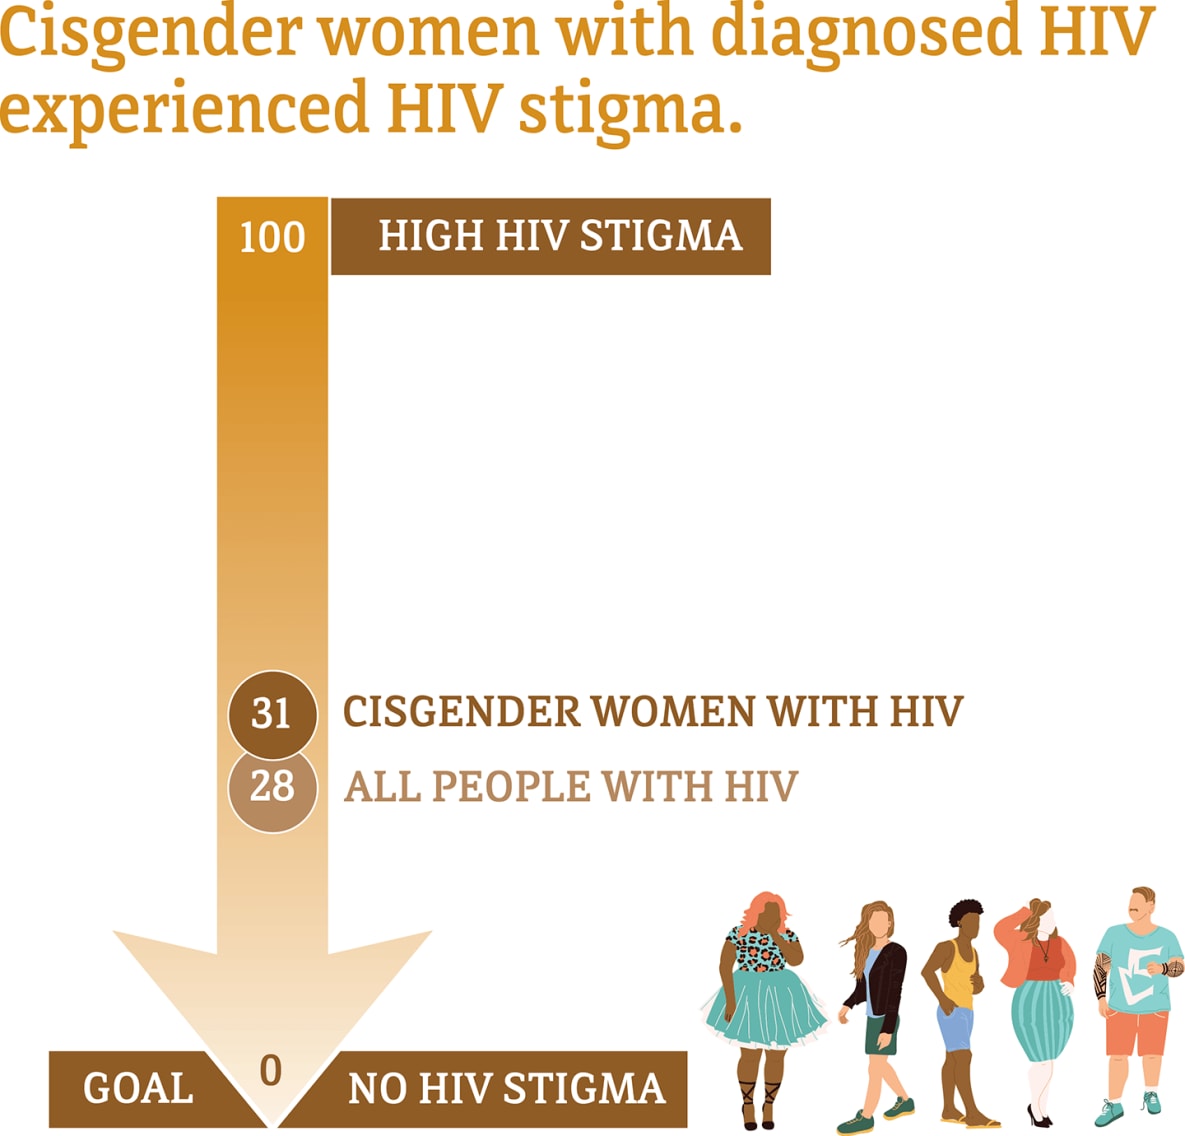 This chart shows that cisgender women with HIV experienced HIV stigma.